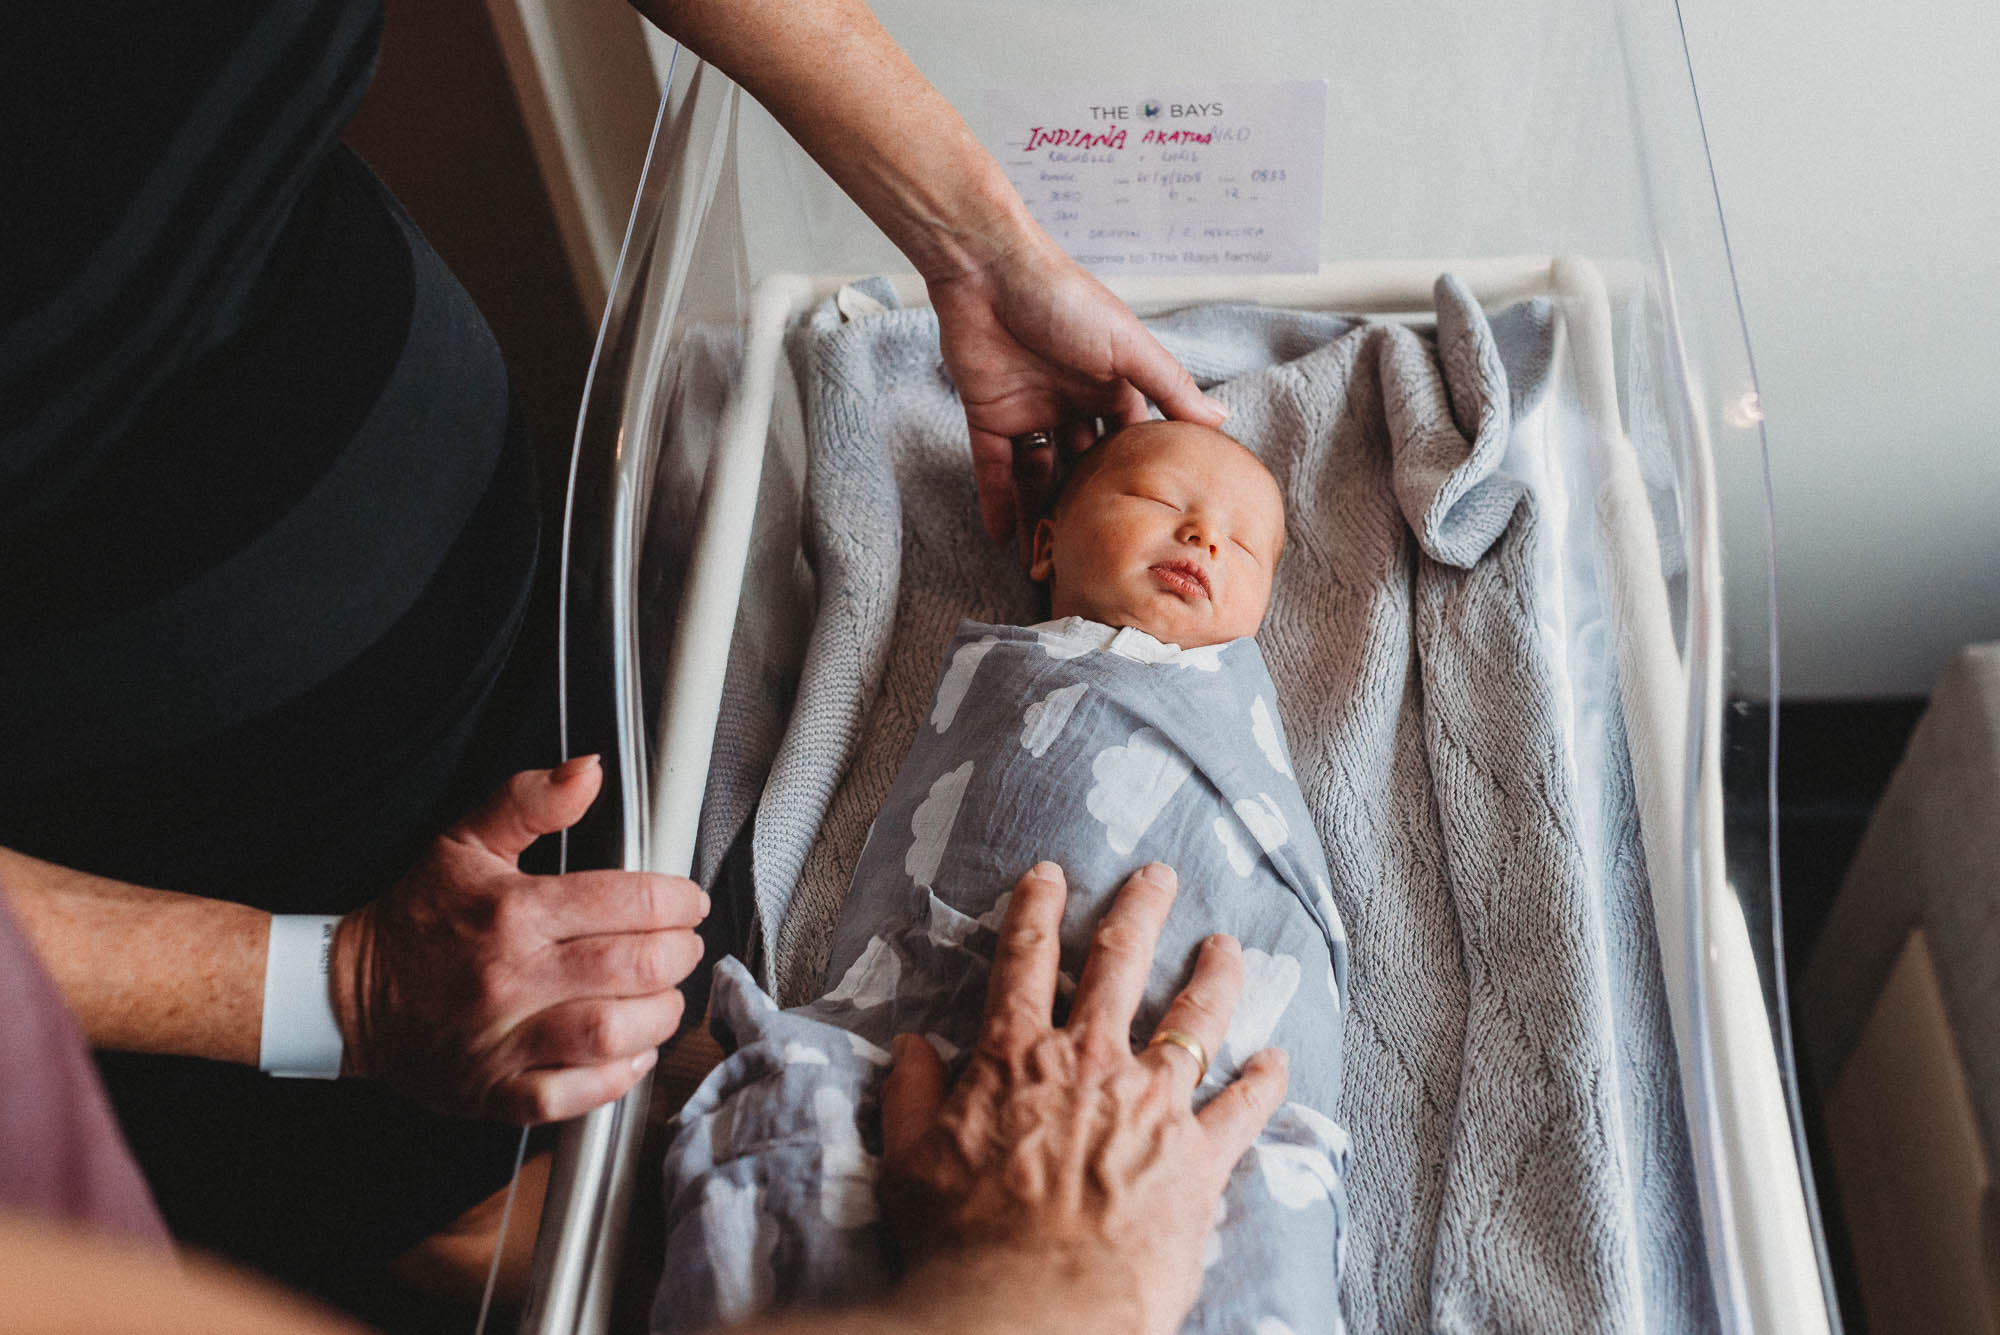 parents-with-hands-on-newborn-at-hosptial-in-bassinet-melbourne